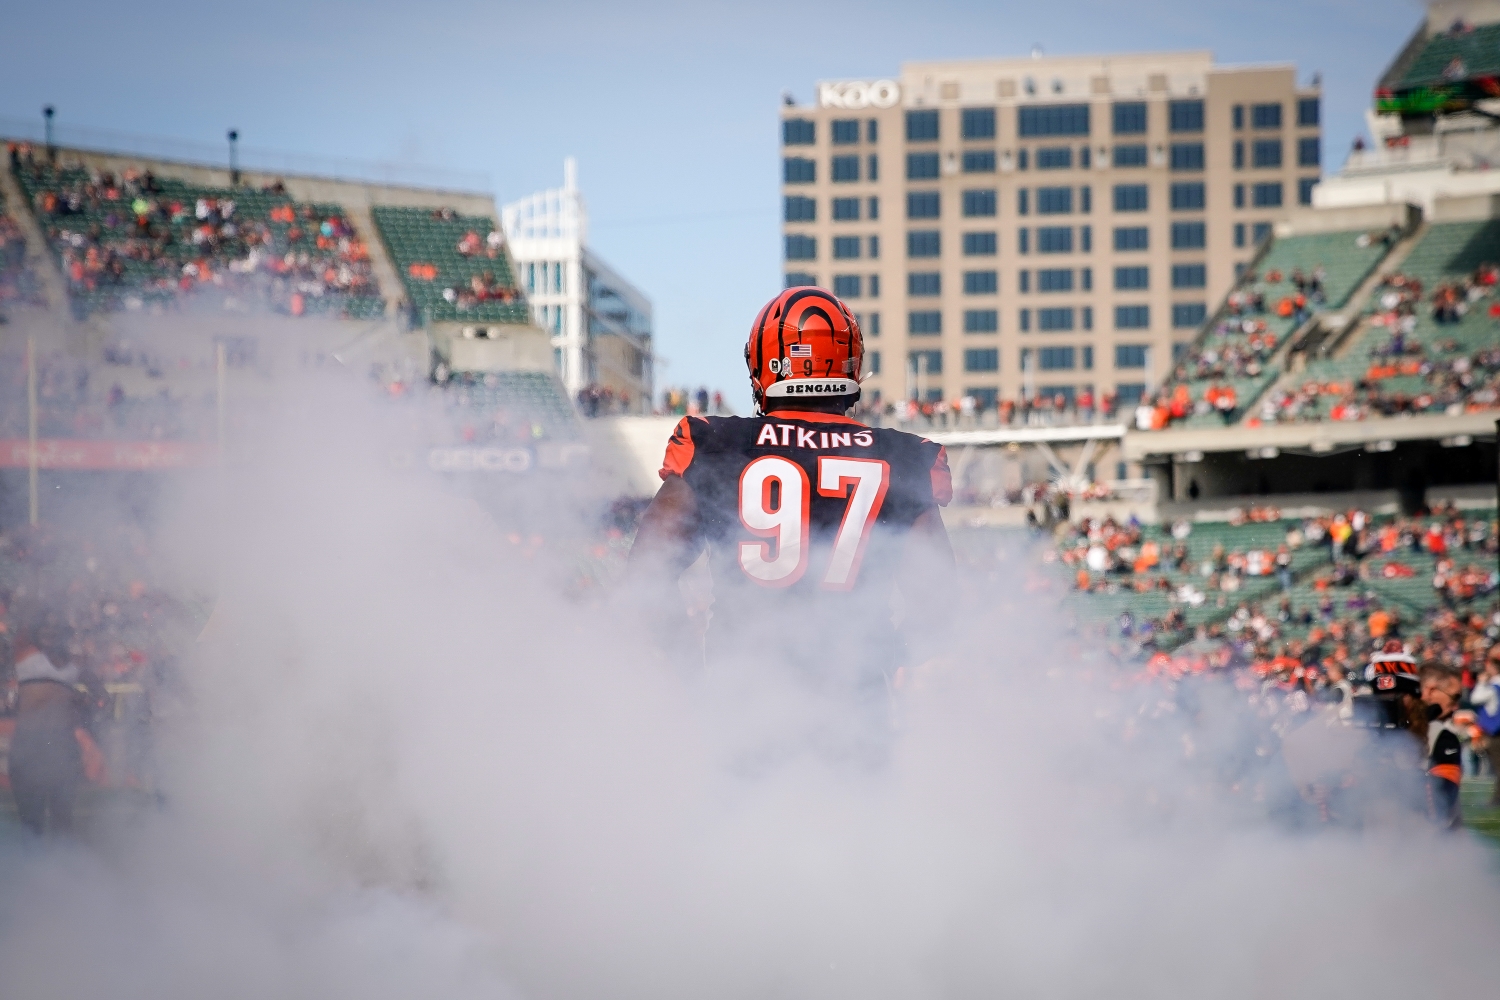 Cincinnati Bengals defensive tackle Geno Atkins runs onto the field before a game against the Baltimore Ravens on Nov. 10, 2019.